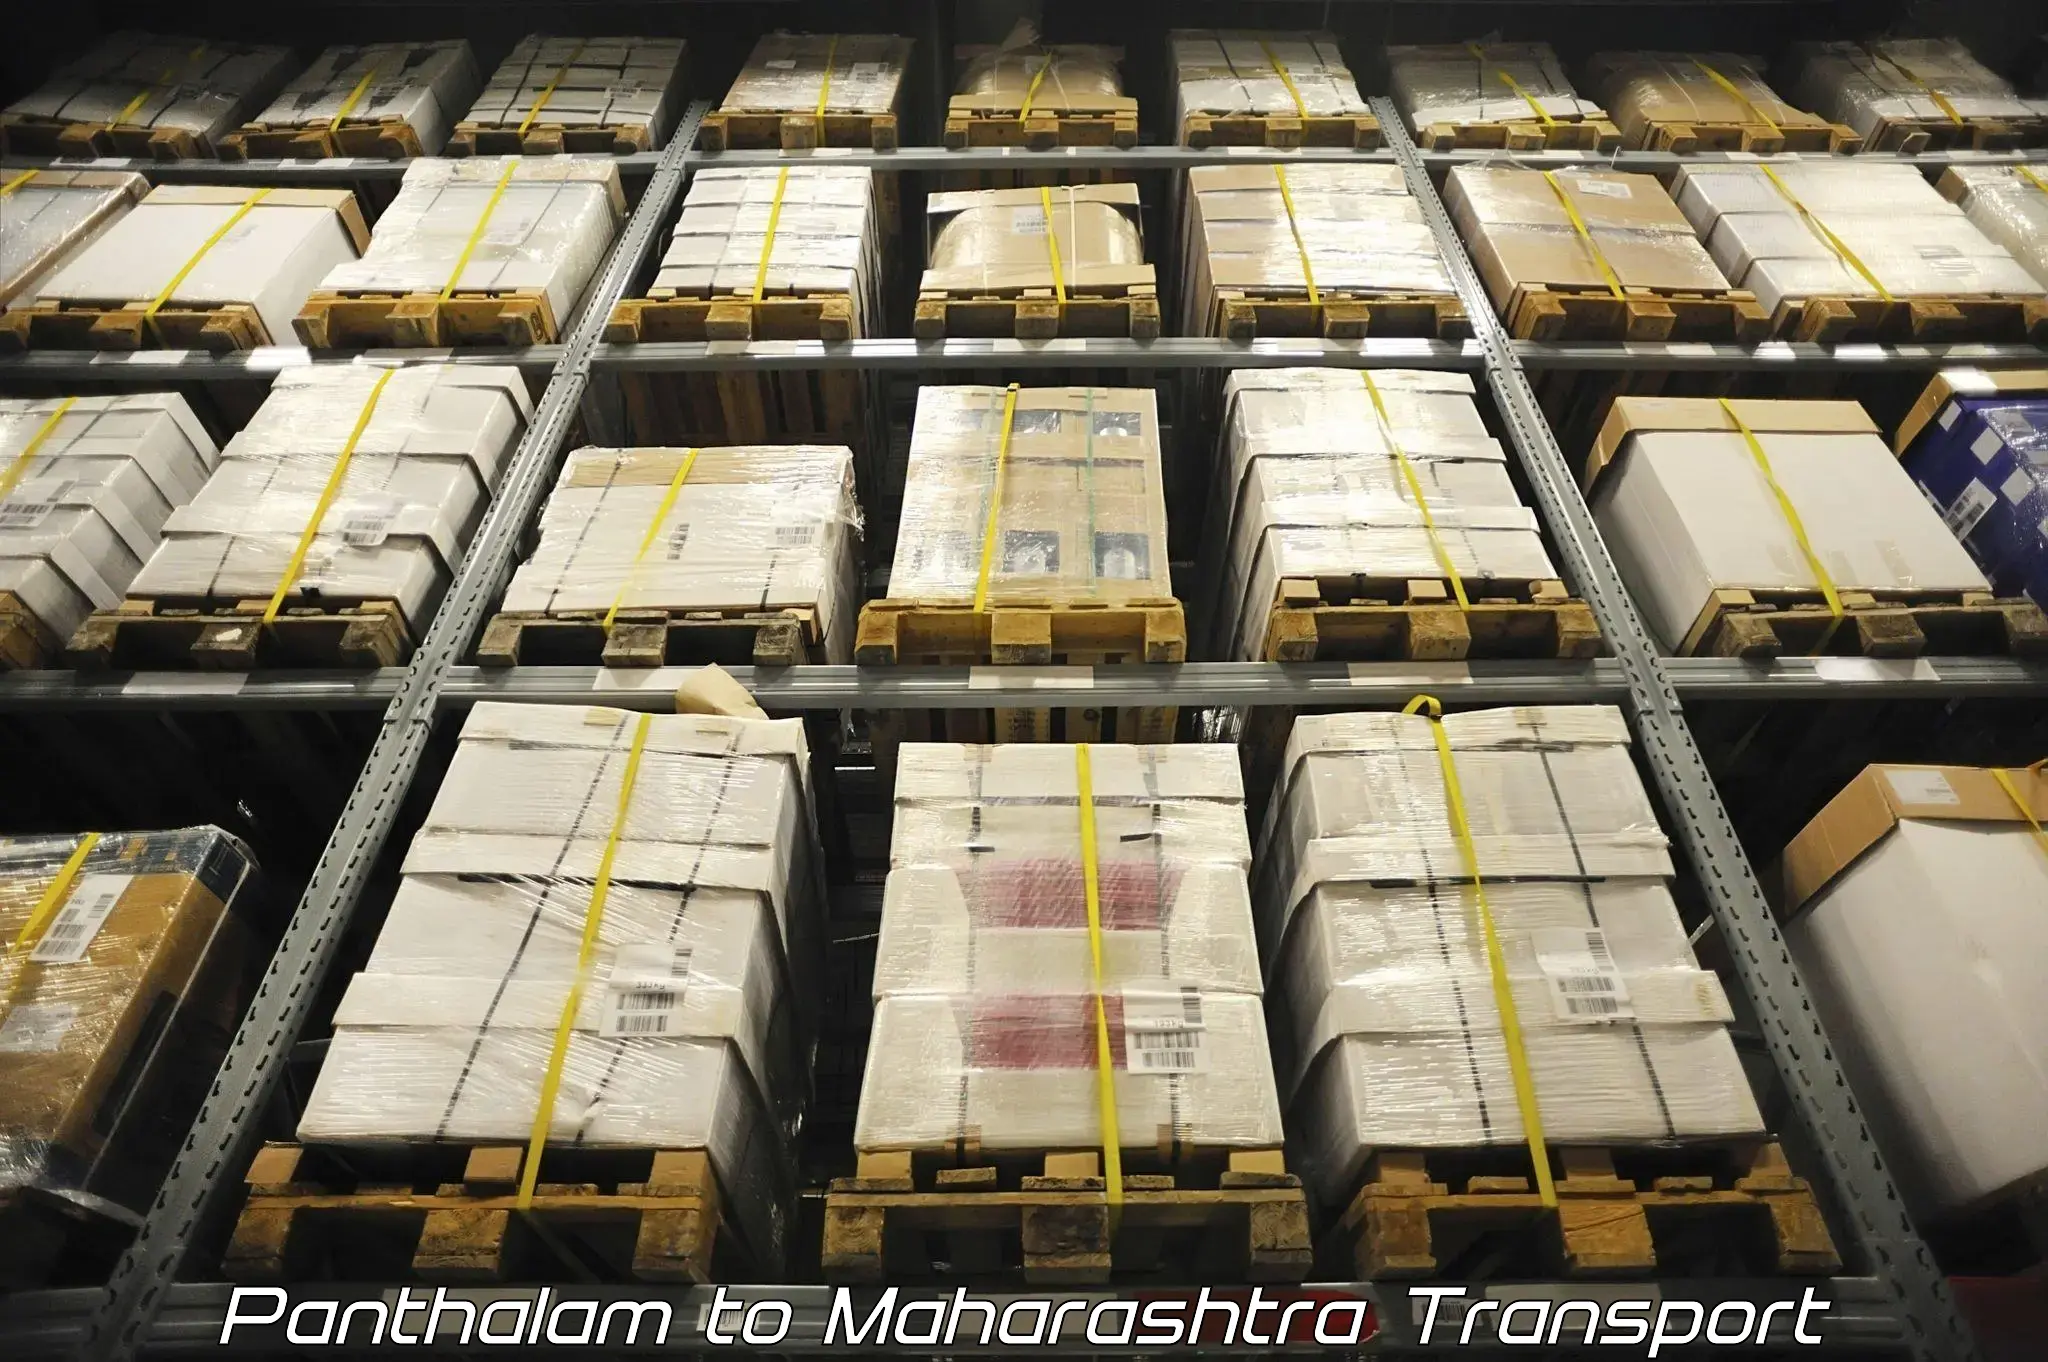 Air freight transport services in Panthalam to Gadchandur